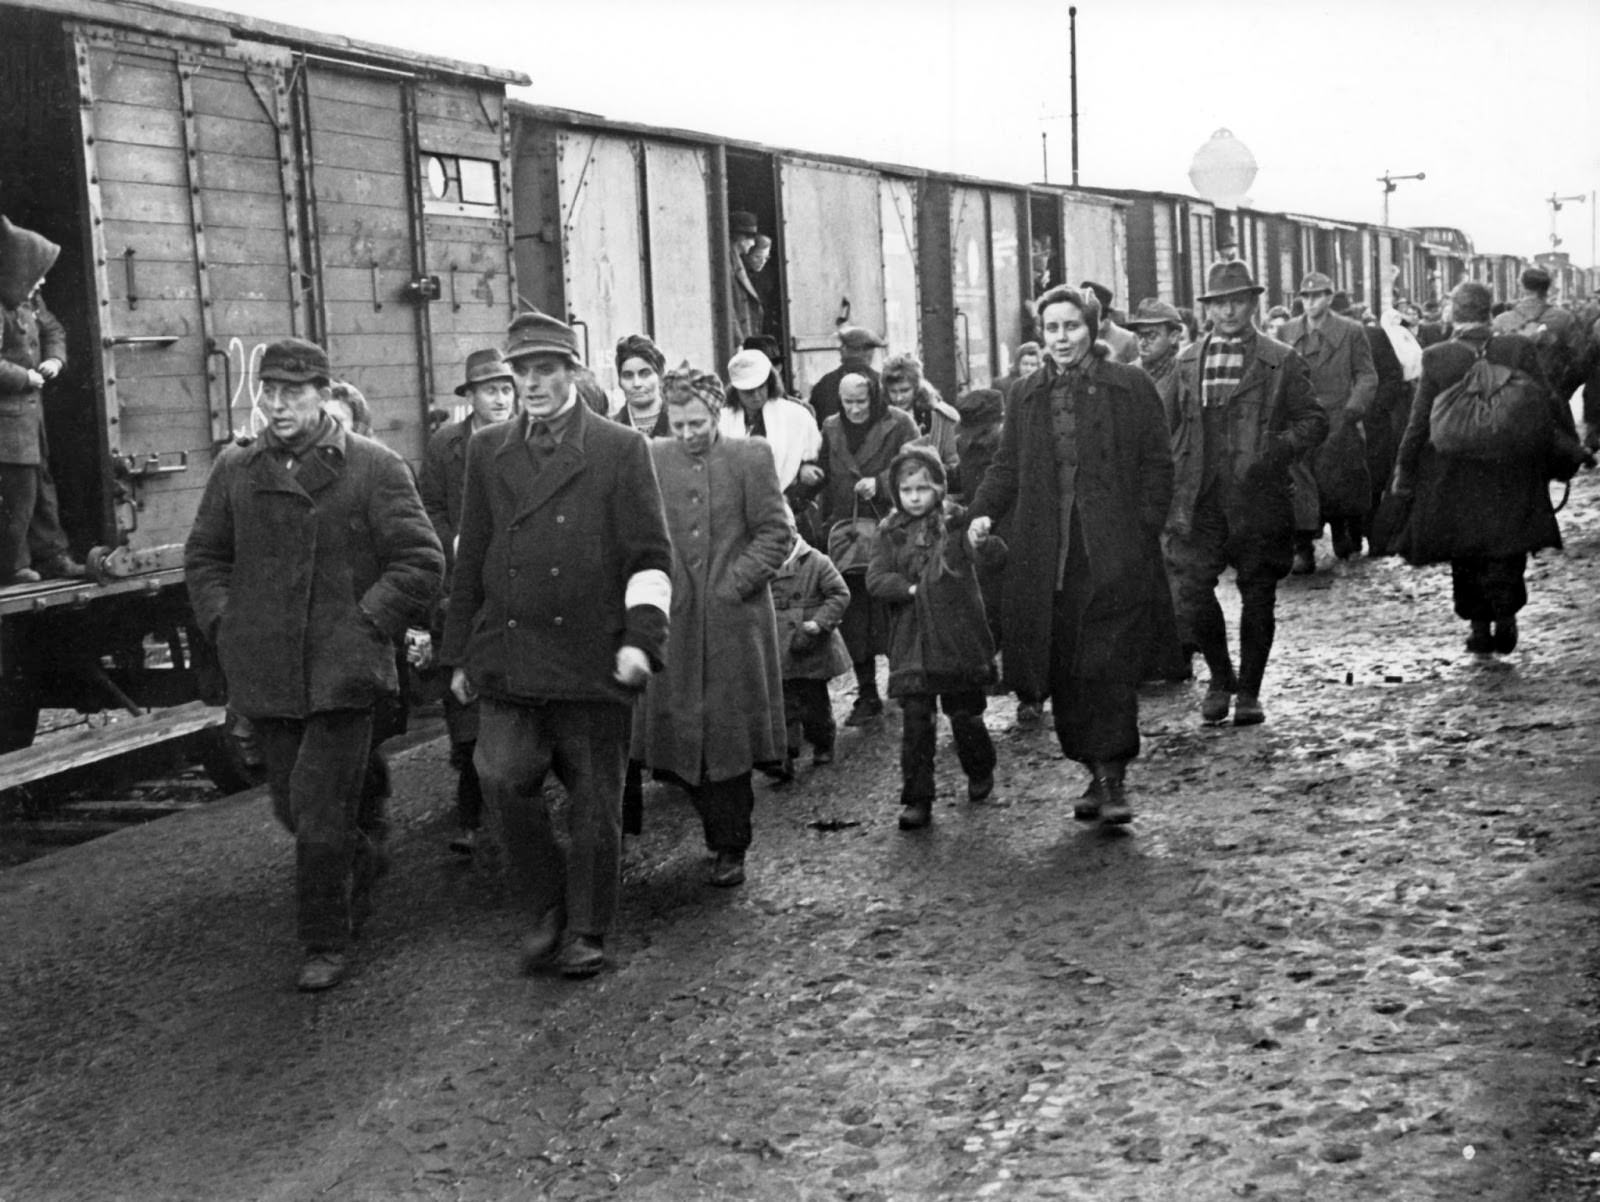 An attendant with white brassard (front, r) accompanies newly arrived refugees, in January 1946, through the refugee camp in Bebra, Germany.